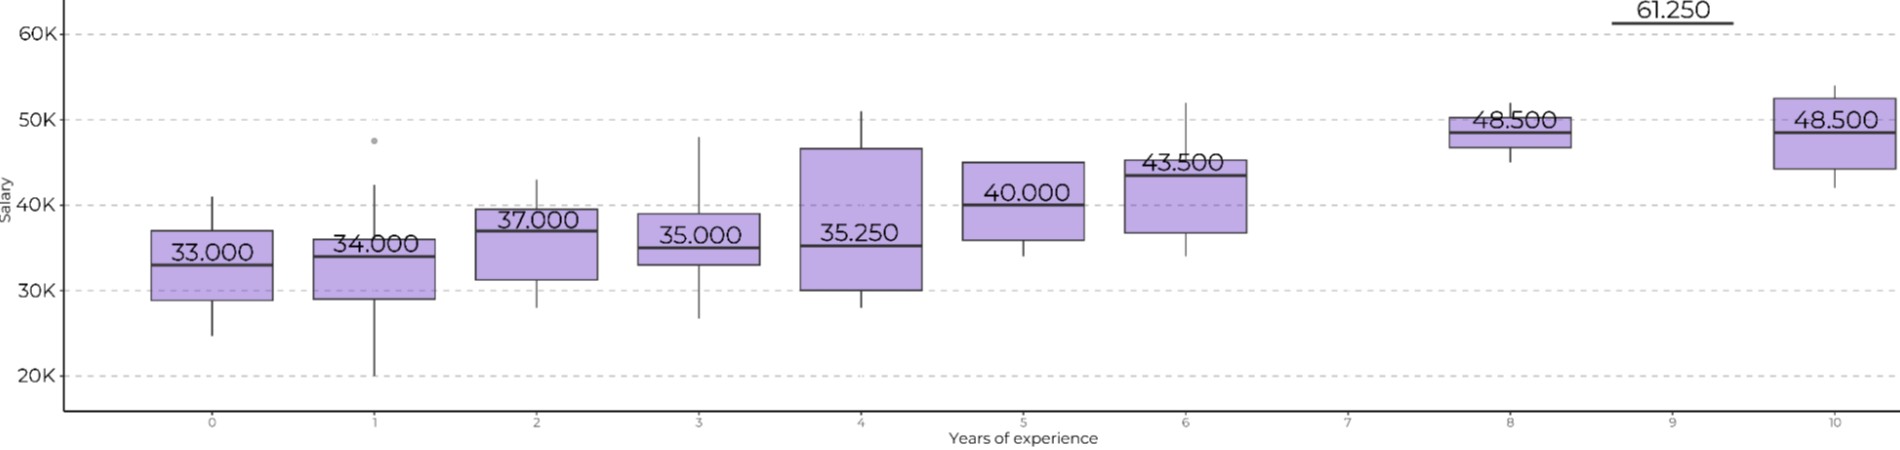 Graph showing salary ranges by years of experience for UX/UI designers.